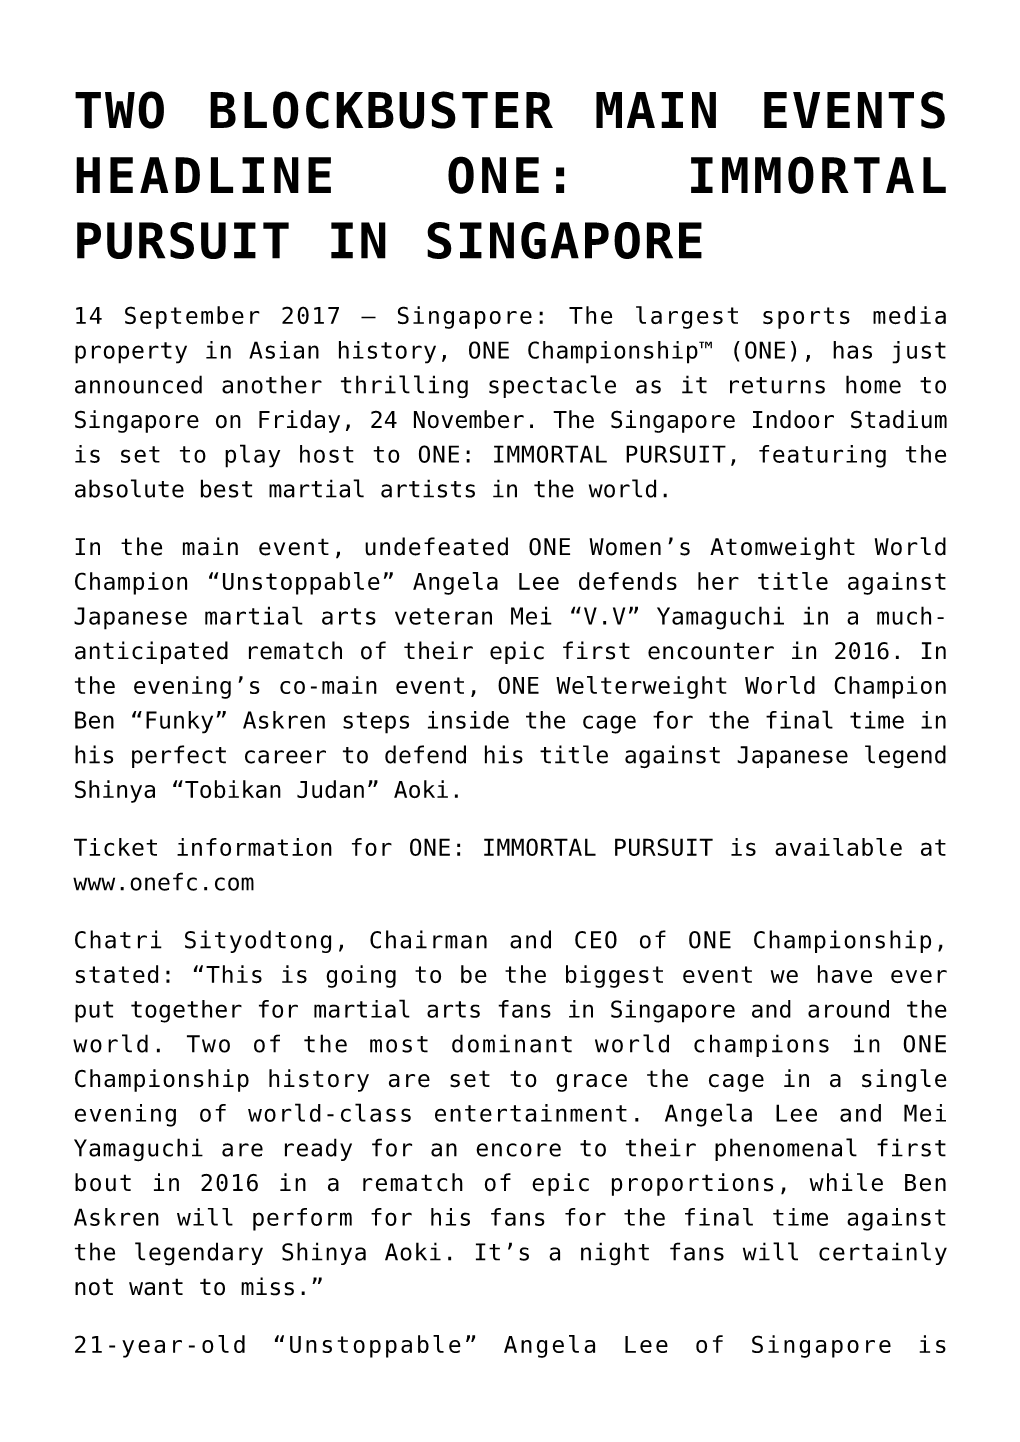 Two Blockbuster Main Events Headline One: Immortal Pursuit in Singapore